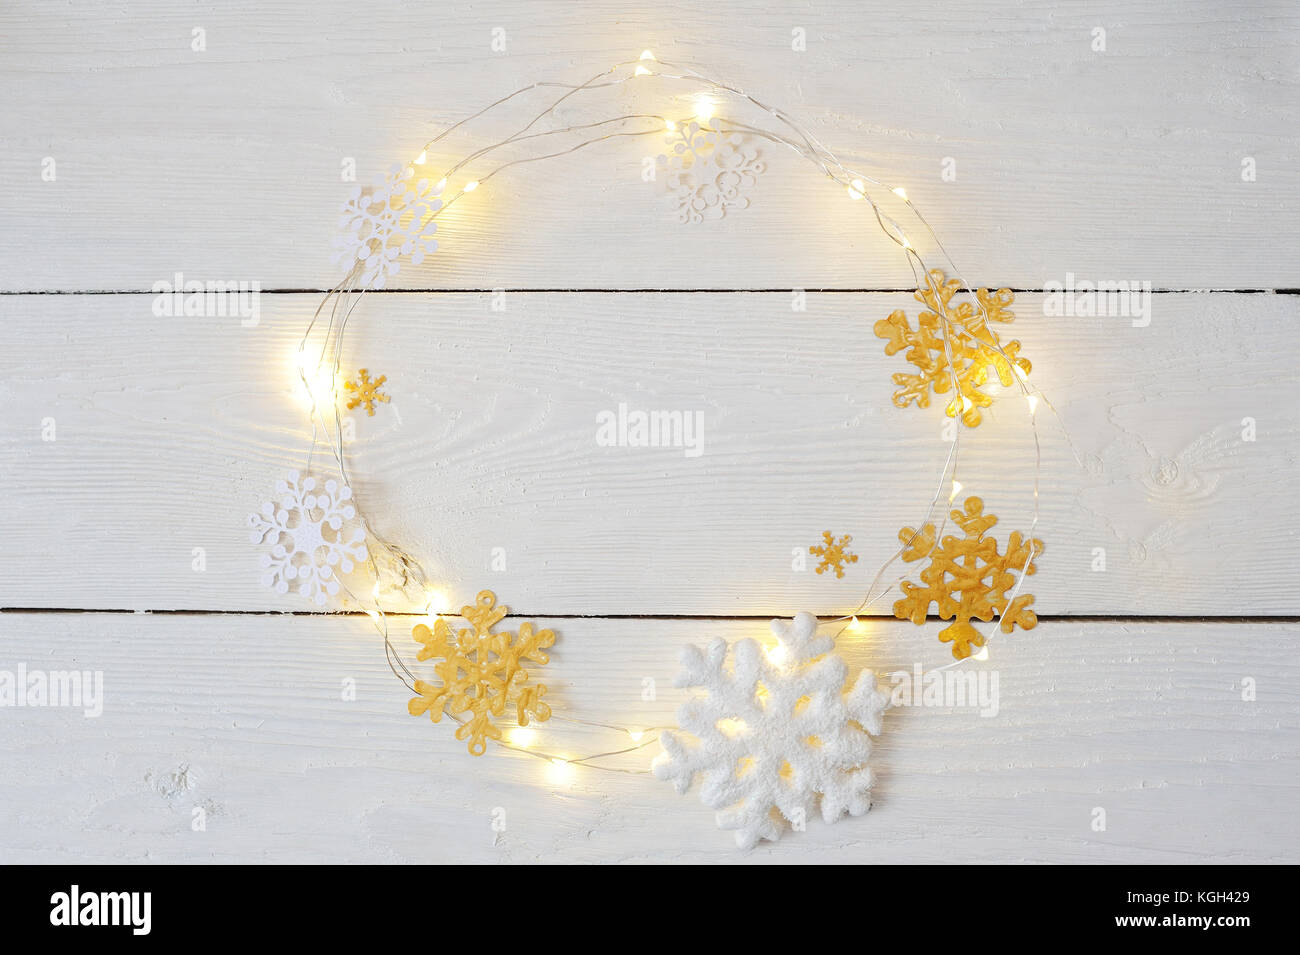 Christmas wreath of snowflakes and garlands on a white wooden background Stock Photo